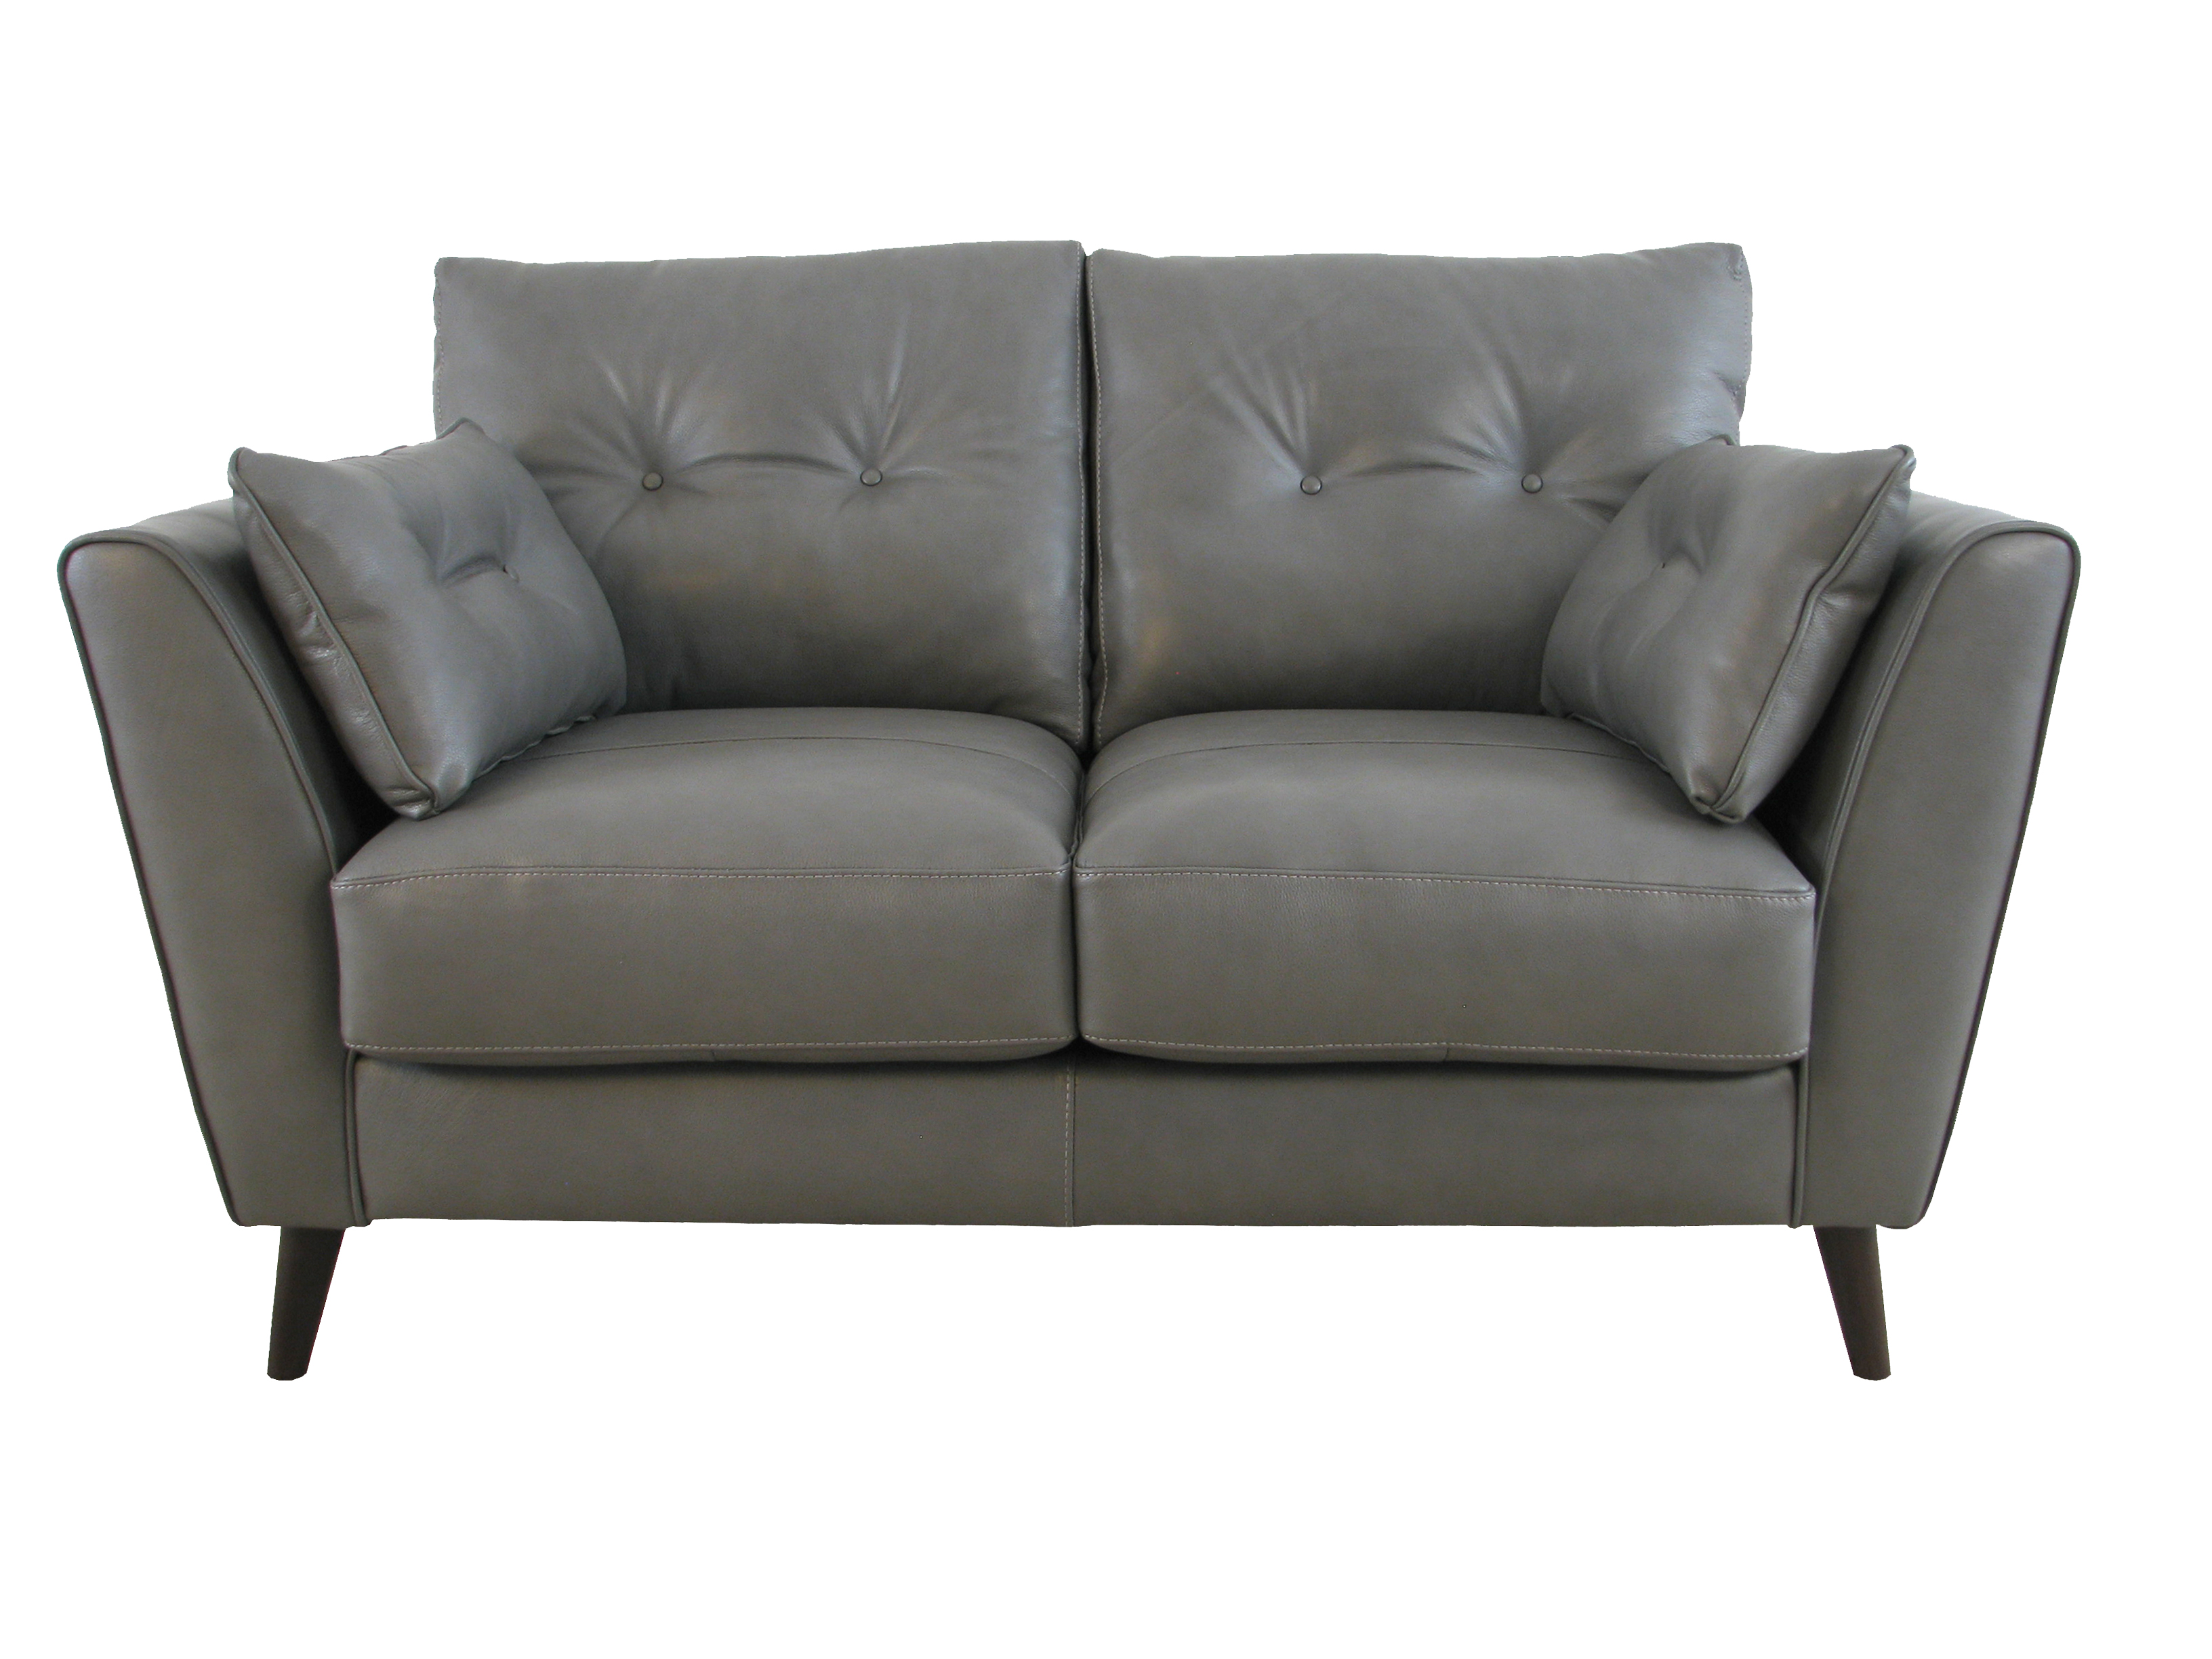 Bellagio Loveseat - OUTLET